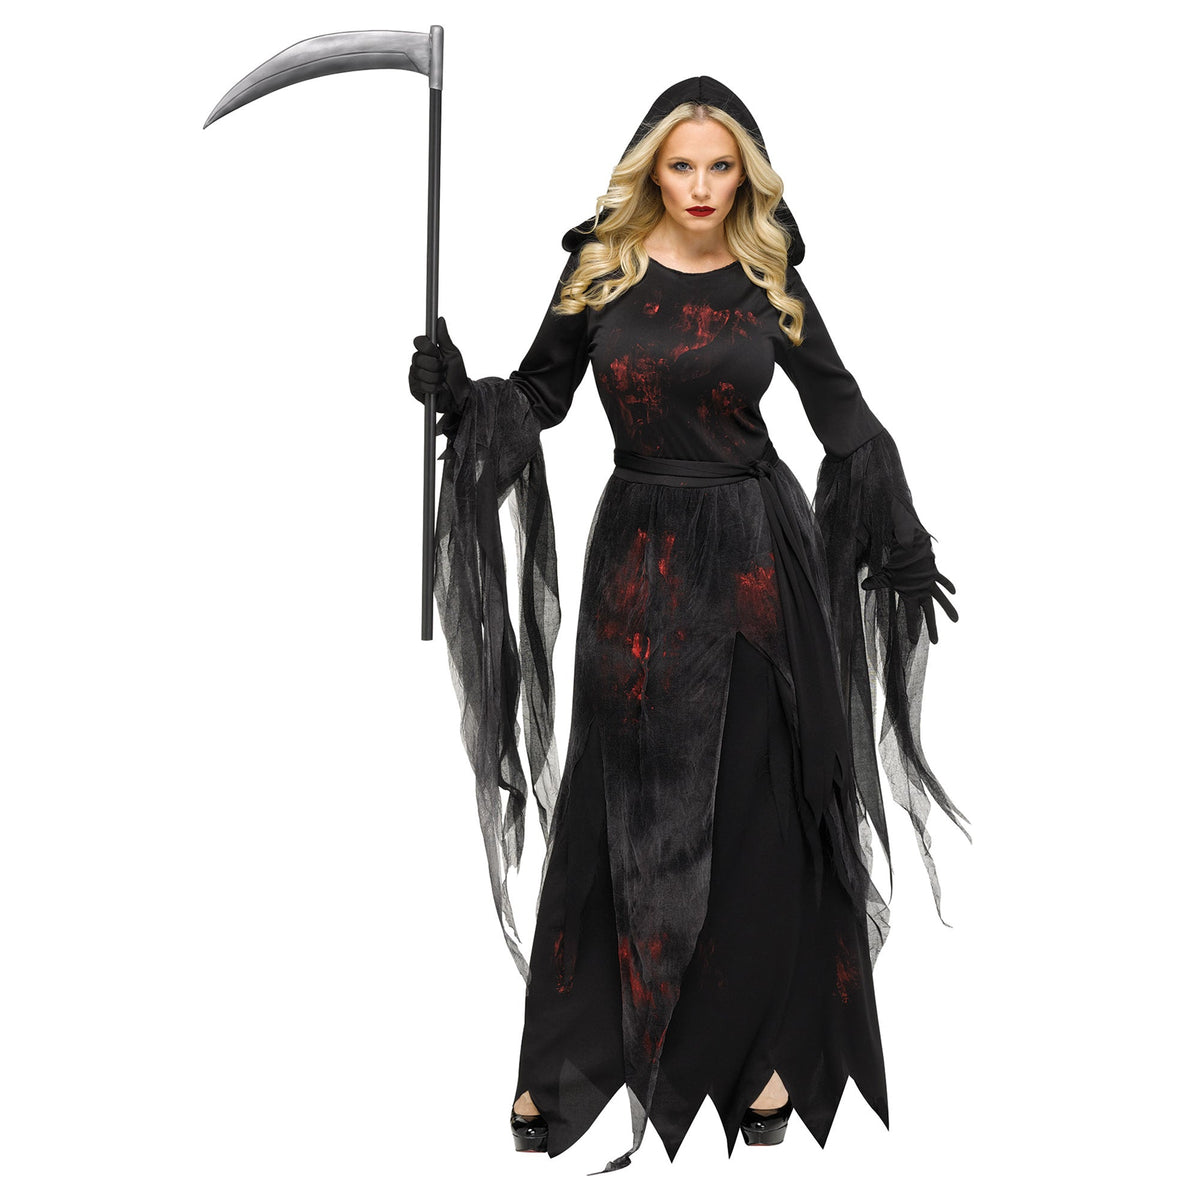 FUN WORLD Costumes Soulless Reaper Costume for Adults, Black and Red Dress